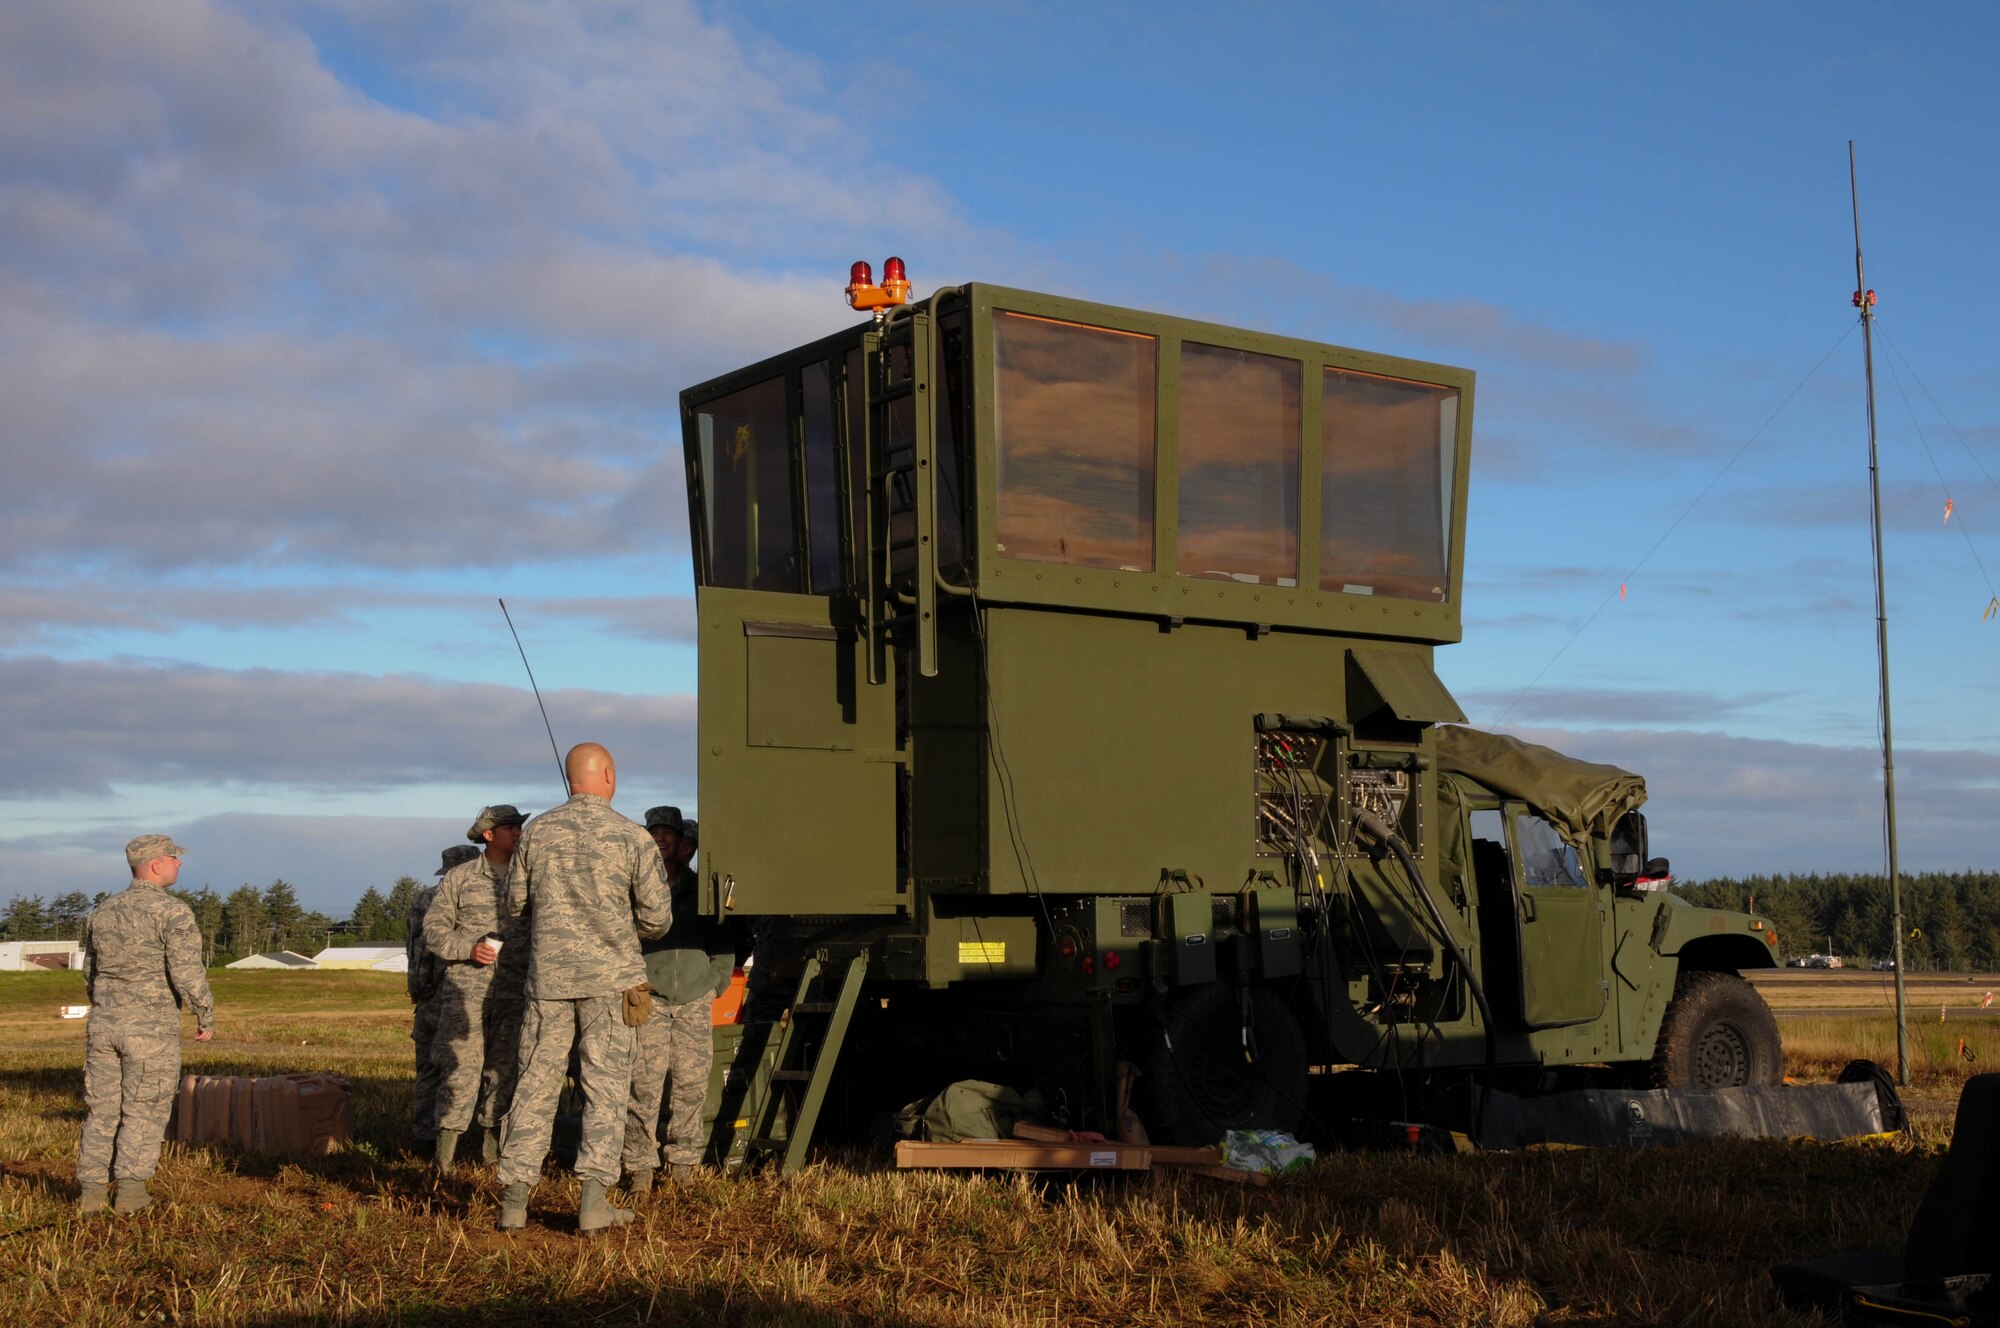 160810-Z-CT752-026: Oregon Air National Guard members, 270th Air Traffic Control Squadron, gather to begin their day during the ATCS annual training at Newport, Ore., Aug. 10, 2016. Members convoyed nearly 300 miles from Klamath Falls, Ore., where they set up their MSN-7 mobile tower, TRN-48 Tactical Air Navigation (TACAN) system, and all supporting equipment which allows them to guide aircraft into and out of nearly any airfield in the world. (U.S. Air National Guard photo by Staff Sgt. Penny Snoozy)